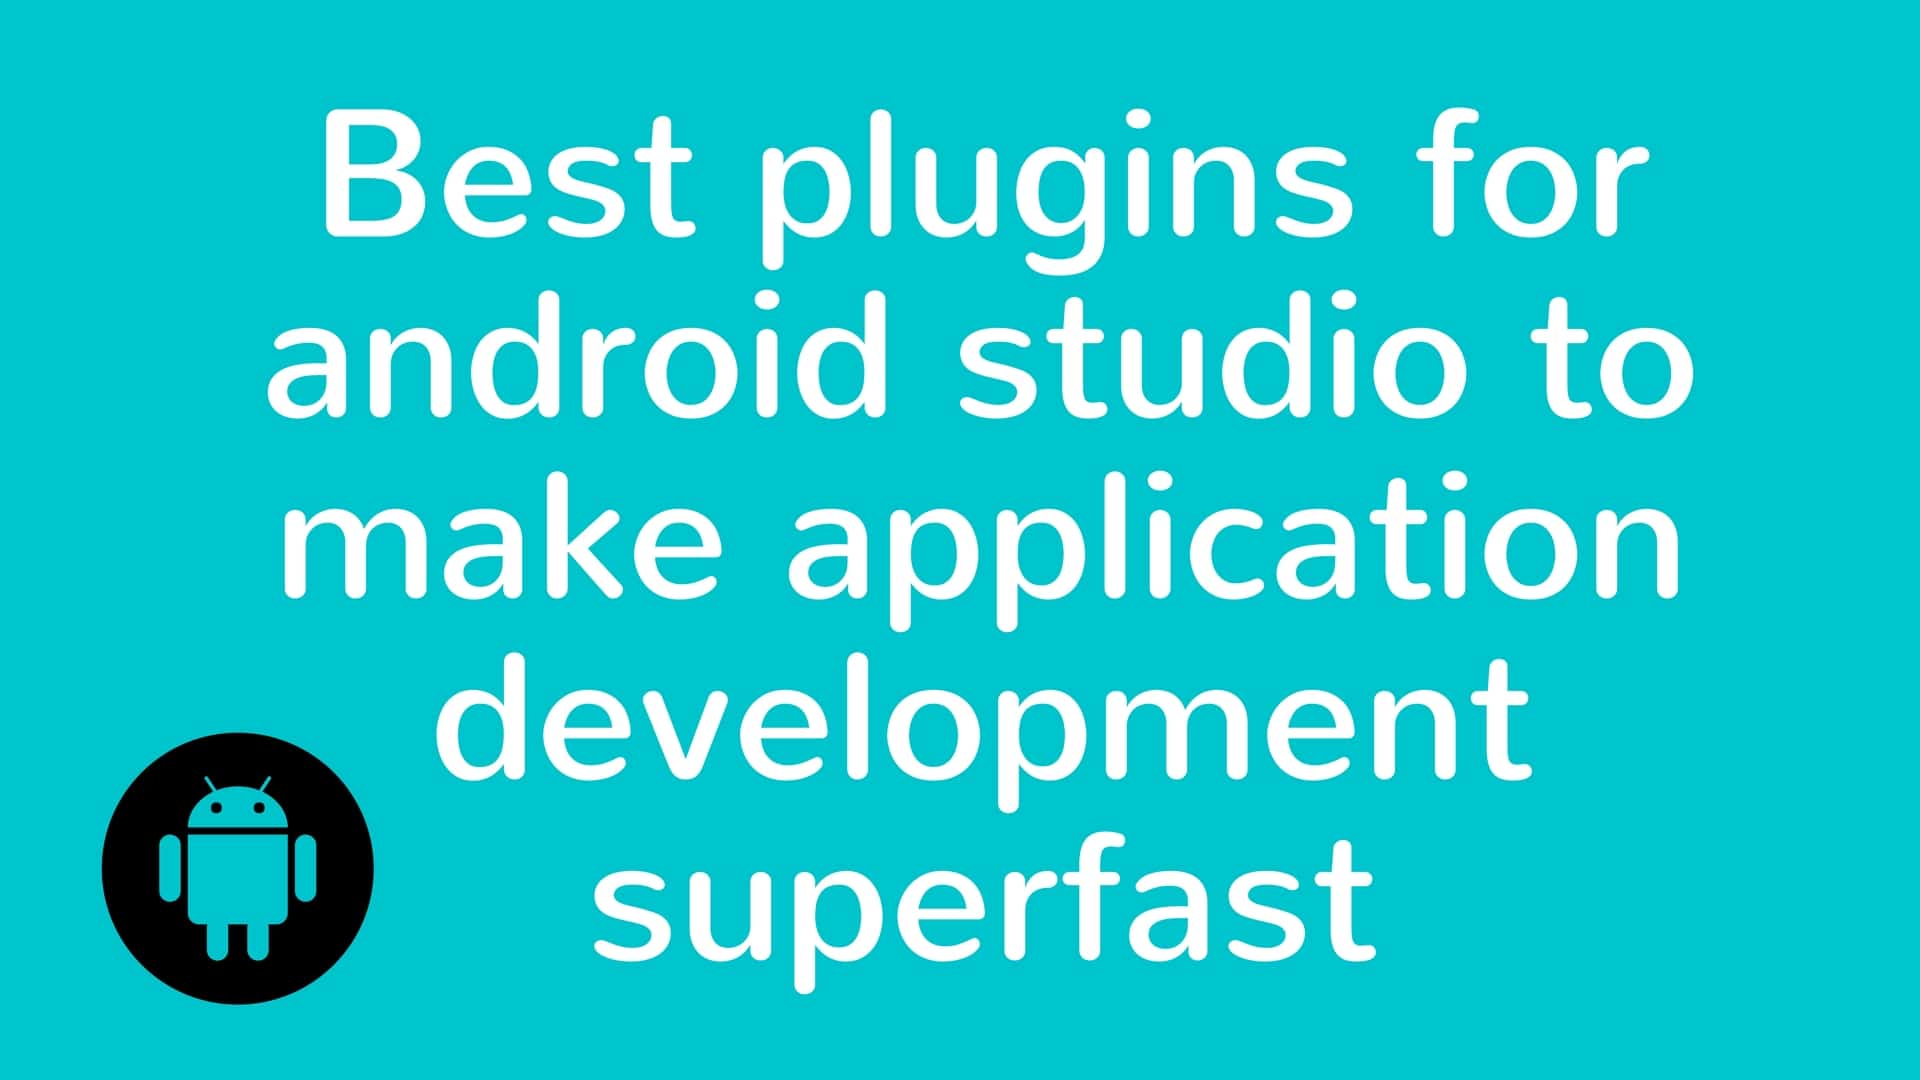 Best plugins for android studio to make application development superfast